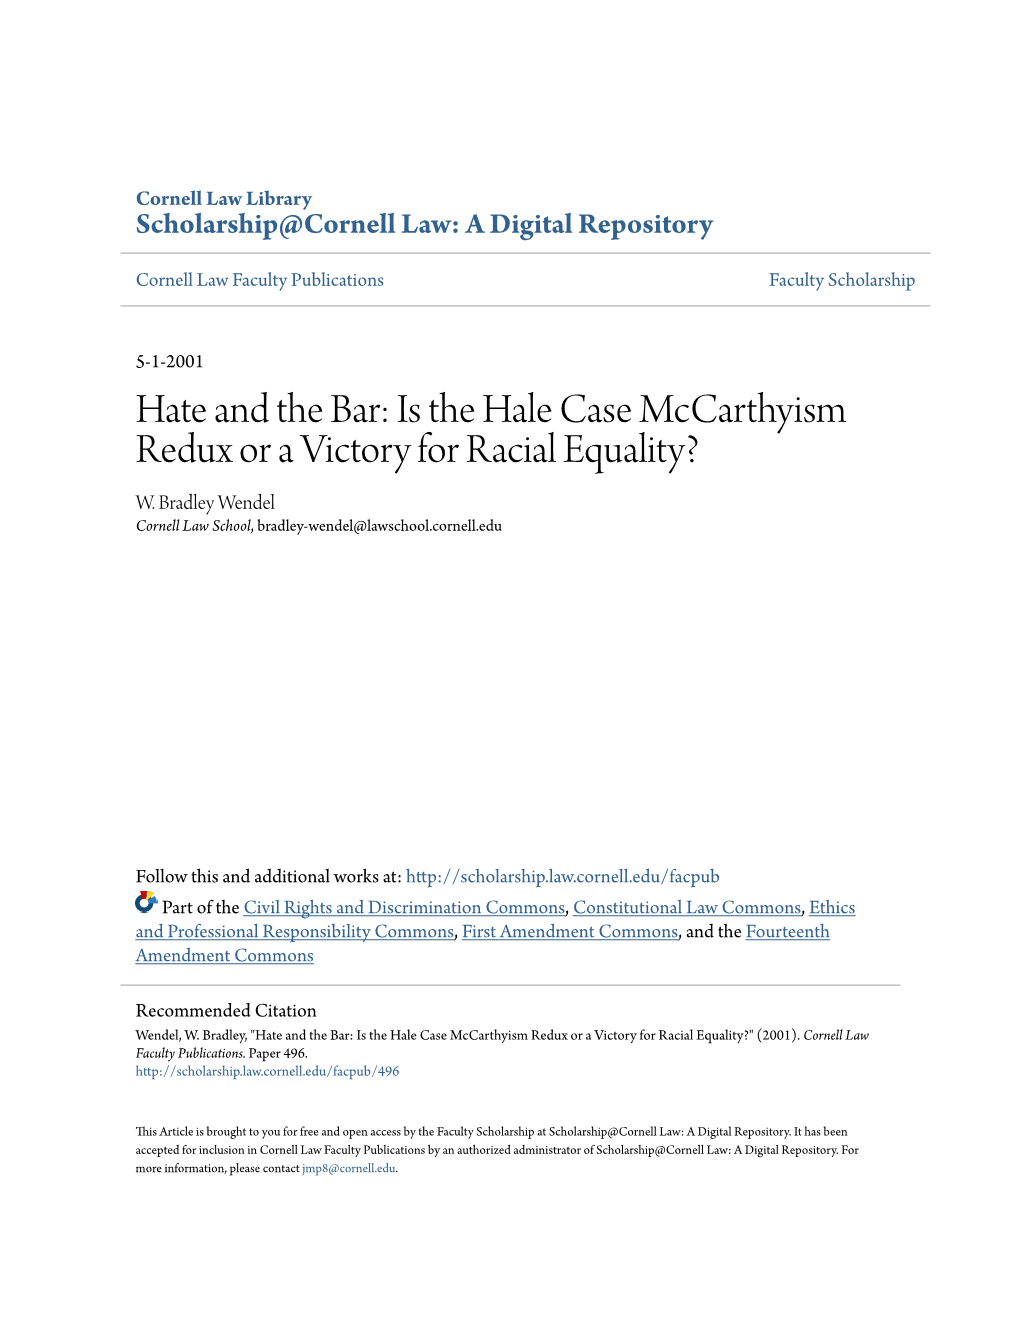 Hate and the Bar: Is the Hale Case Mccarthyism Redux Or a Victory for Racial Equality? W